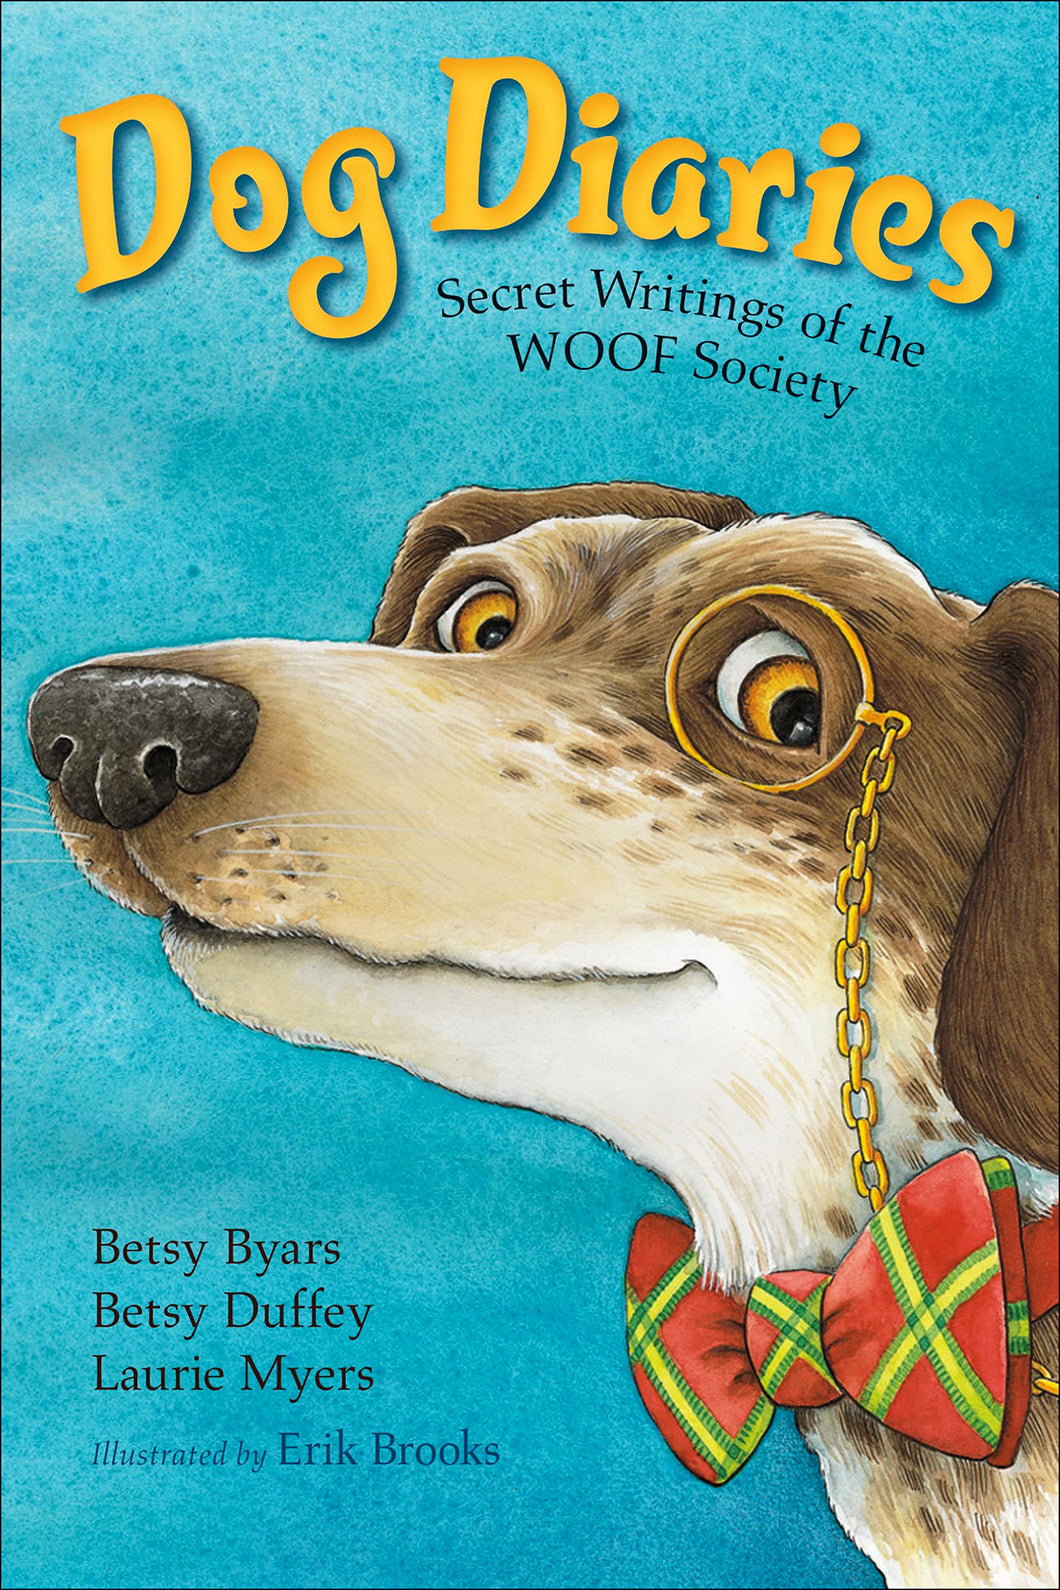 Dog Diaries: Secret Writings of the Woof Society by Betsy Cromer Byars, Laurie Myers & Betsy Duffey / Paperback - NEW BOOK